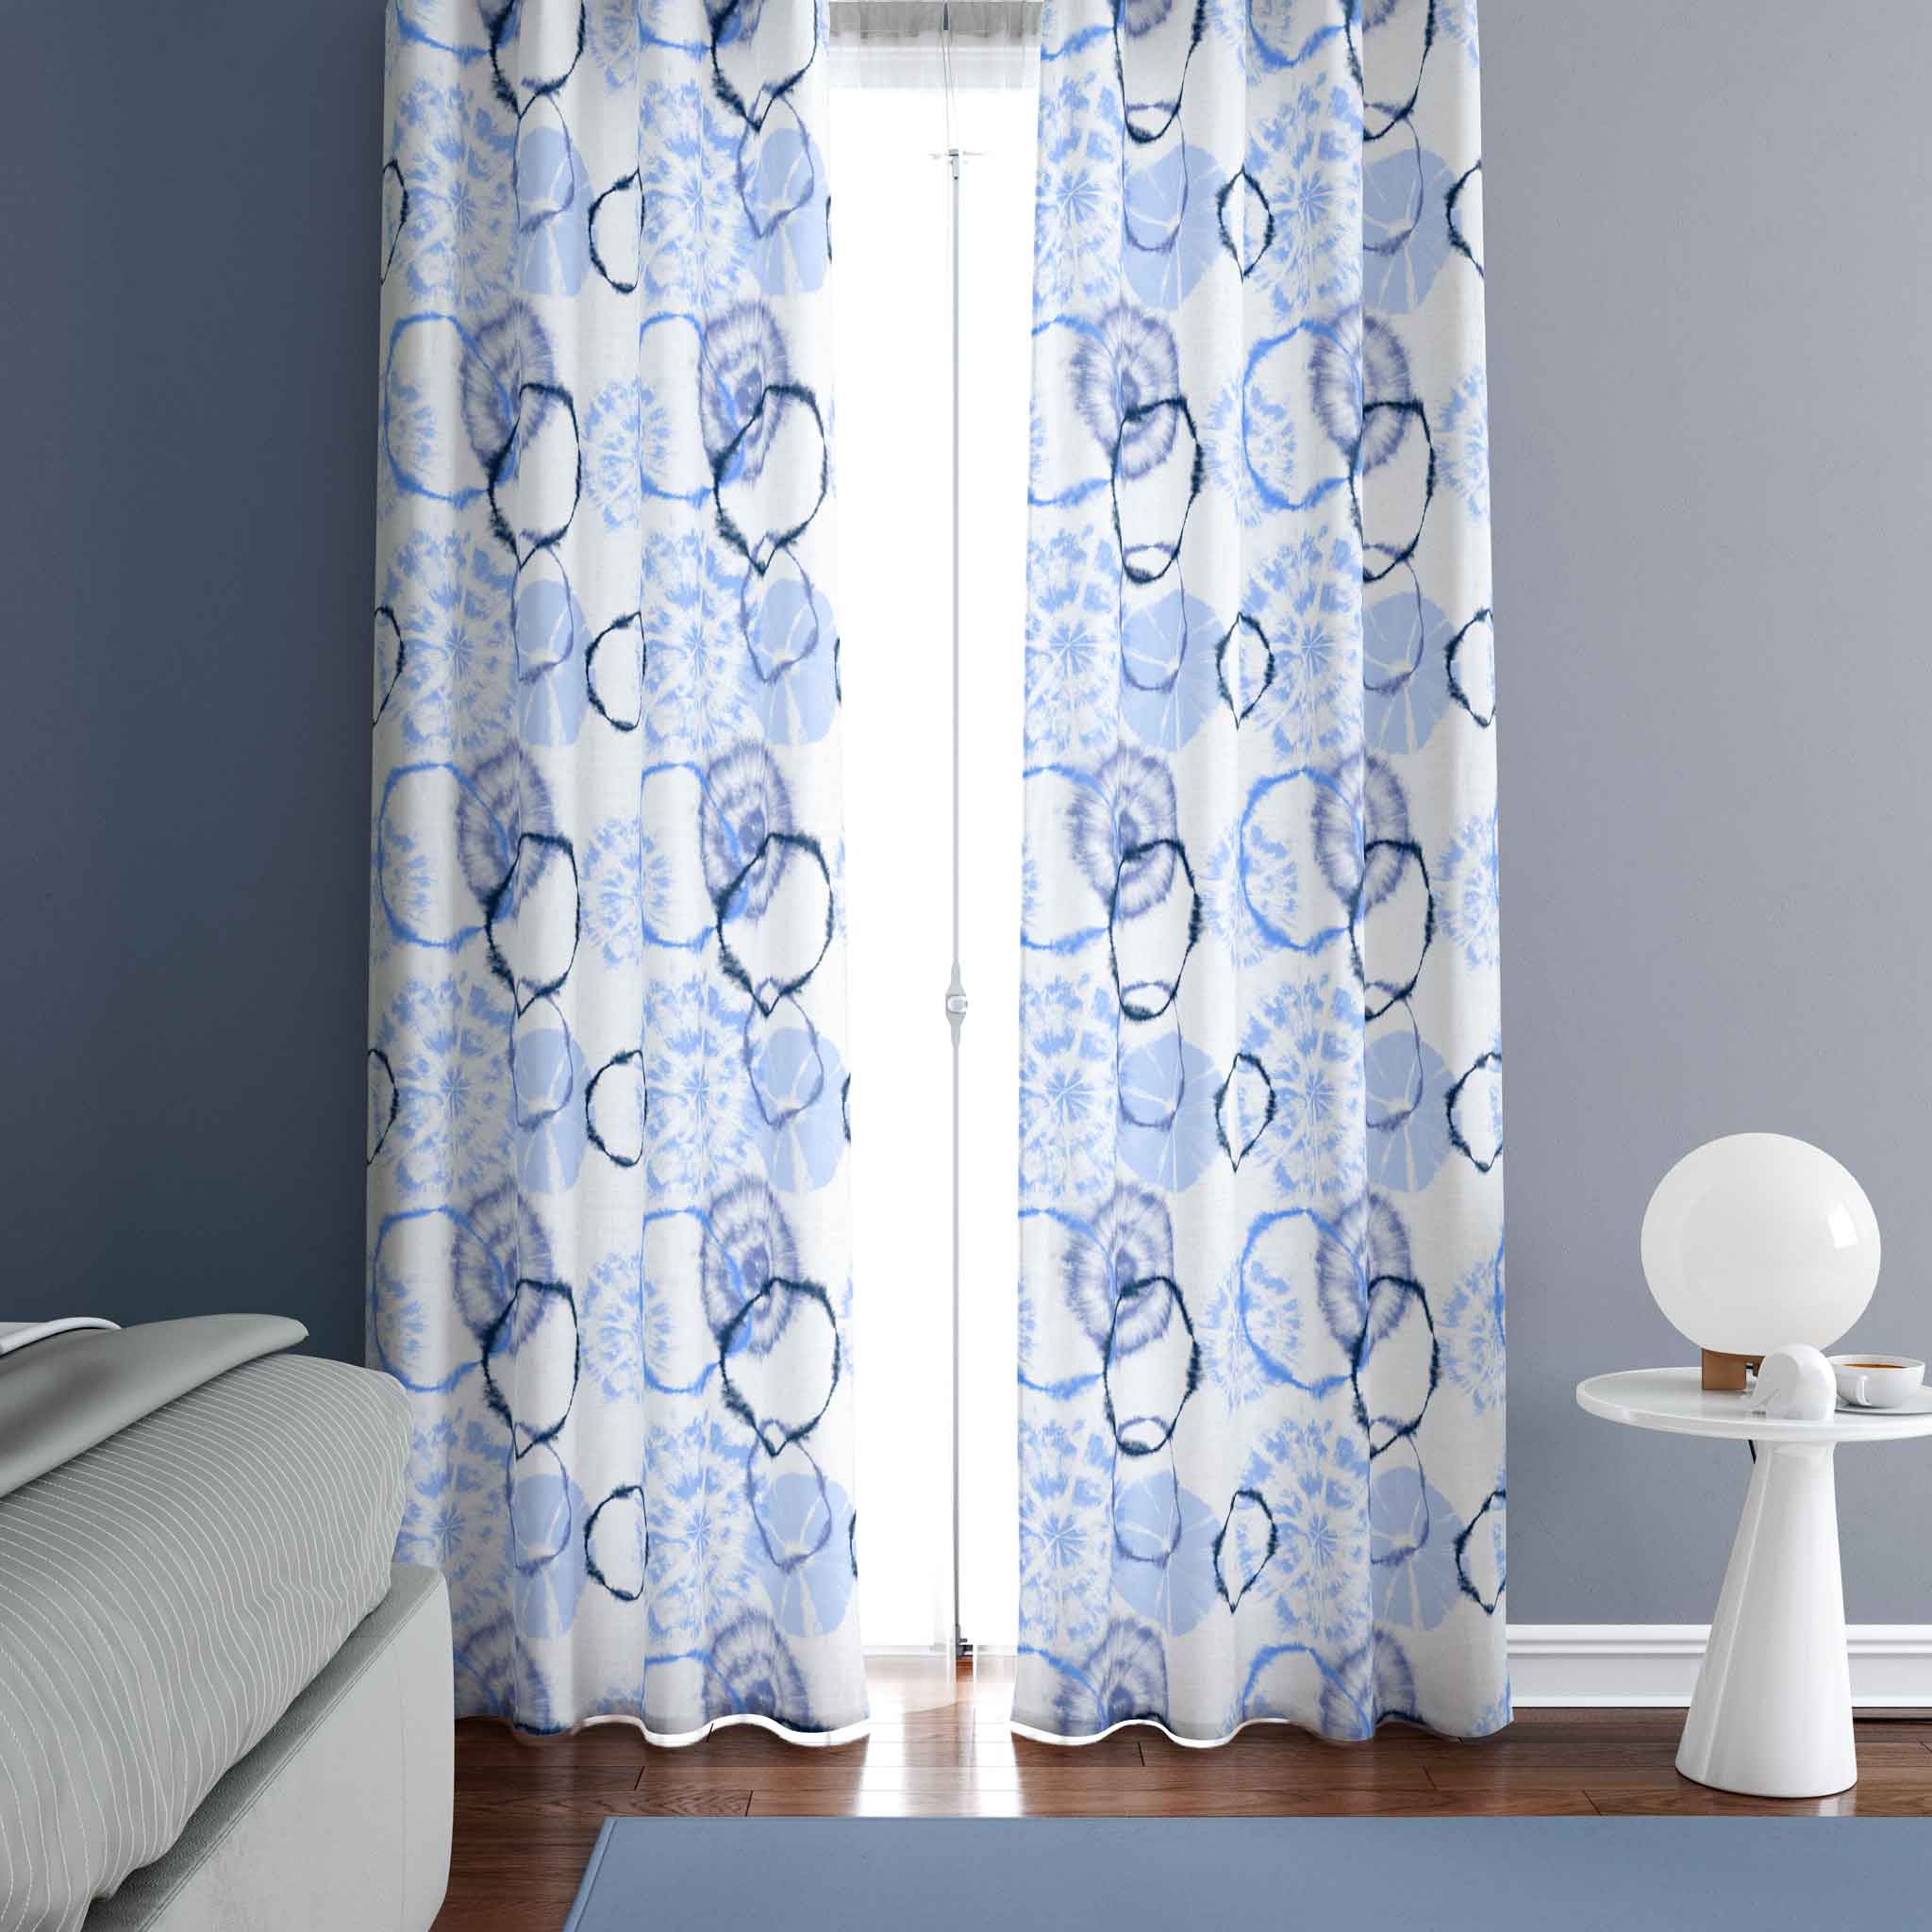 Example of a room with a view of the full length of the curtains.